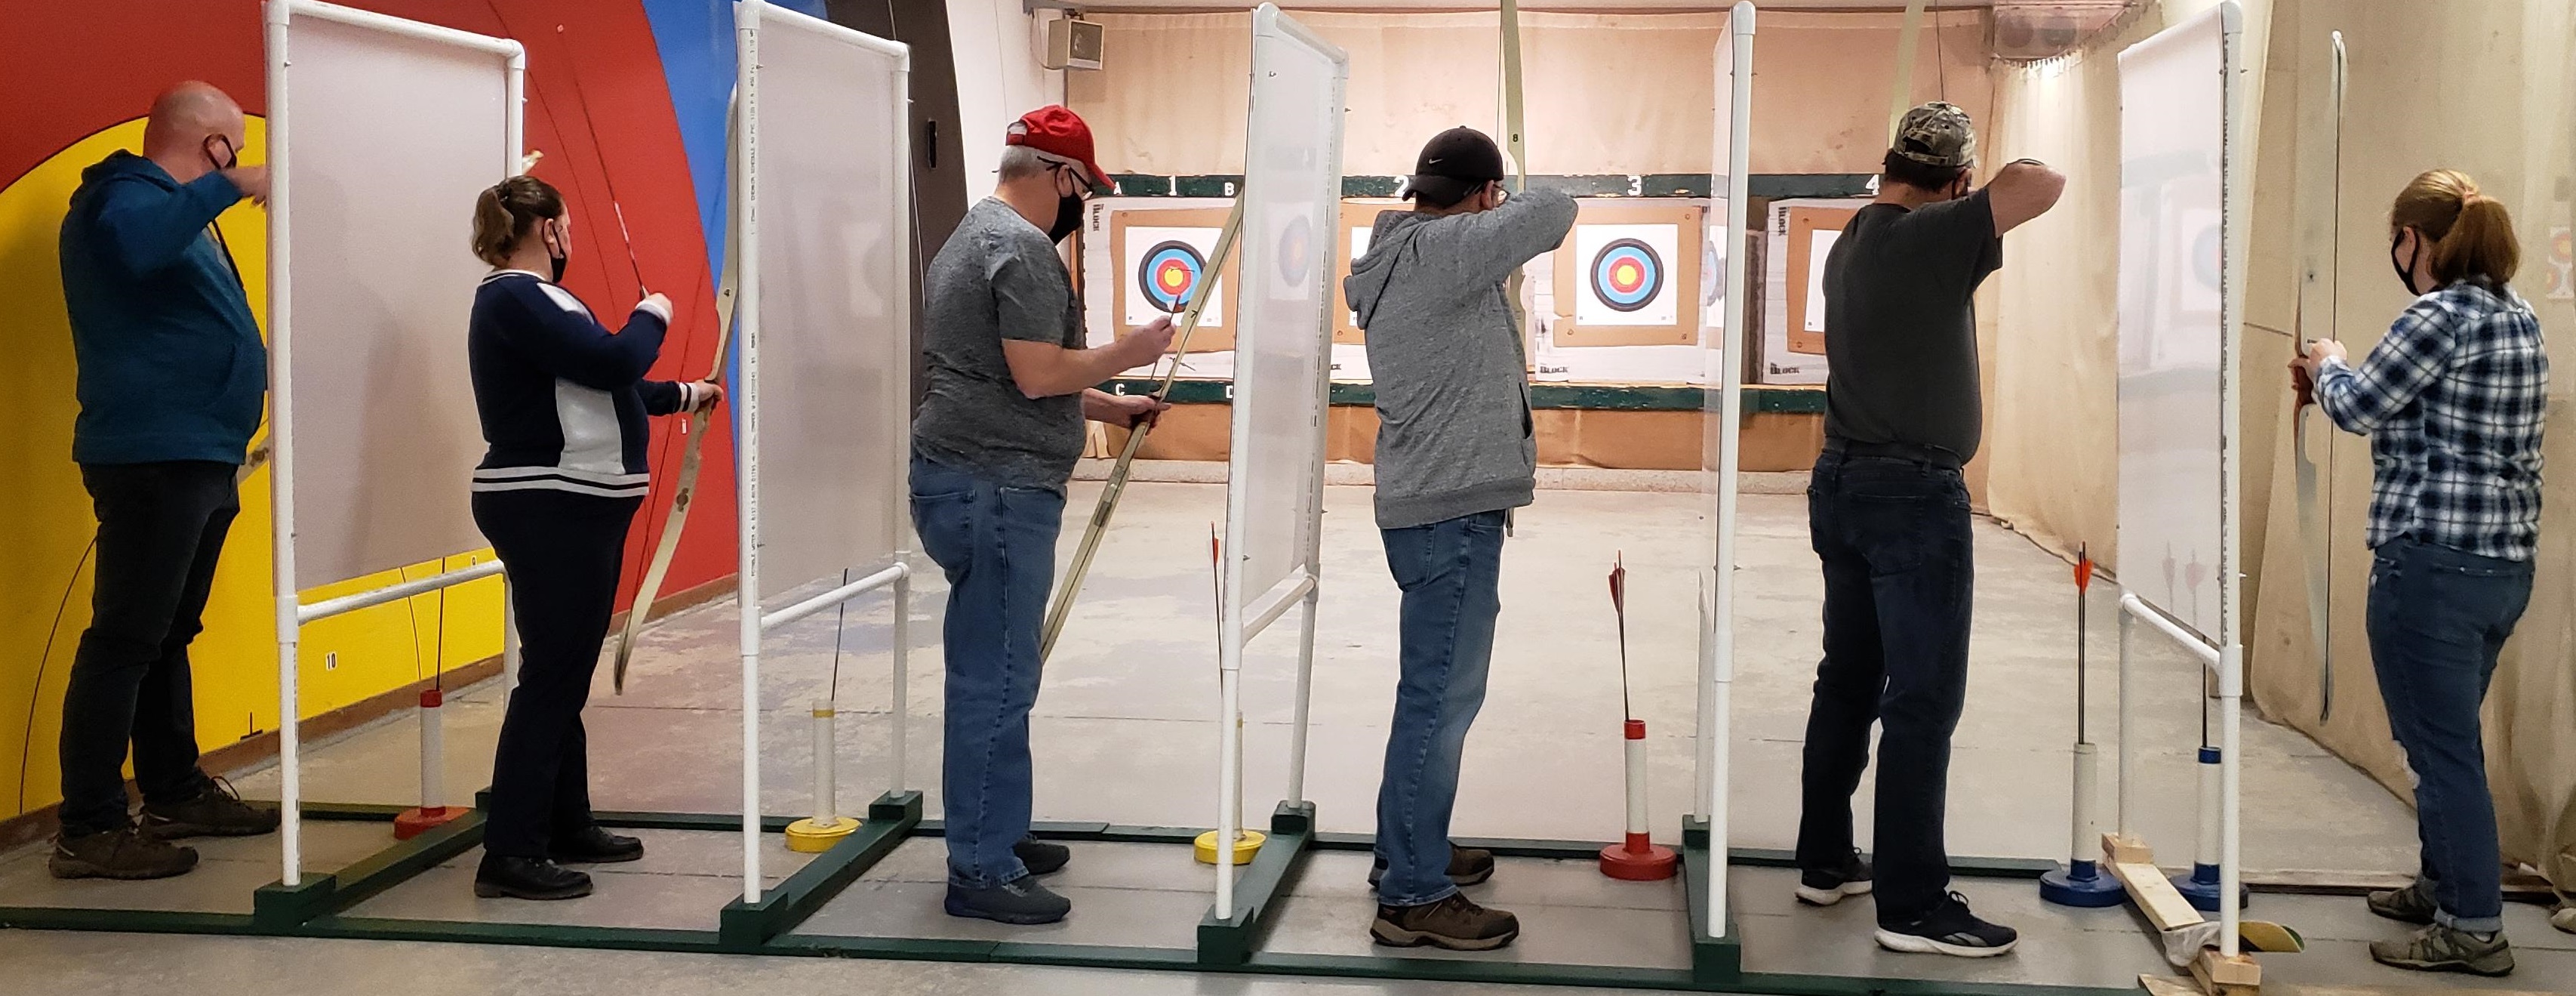 Archery Camp in Montreal, QC Image